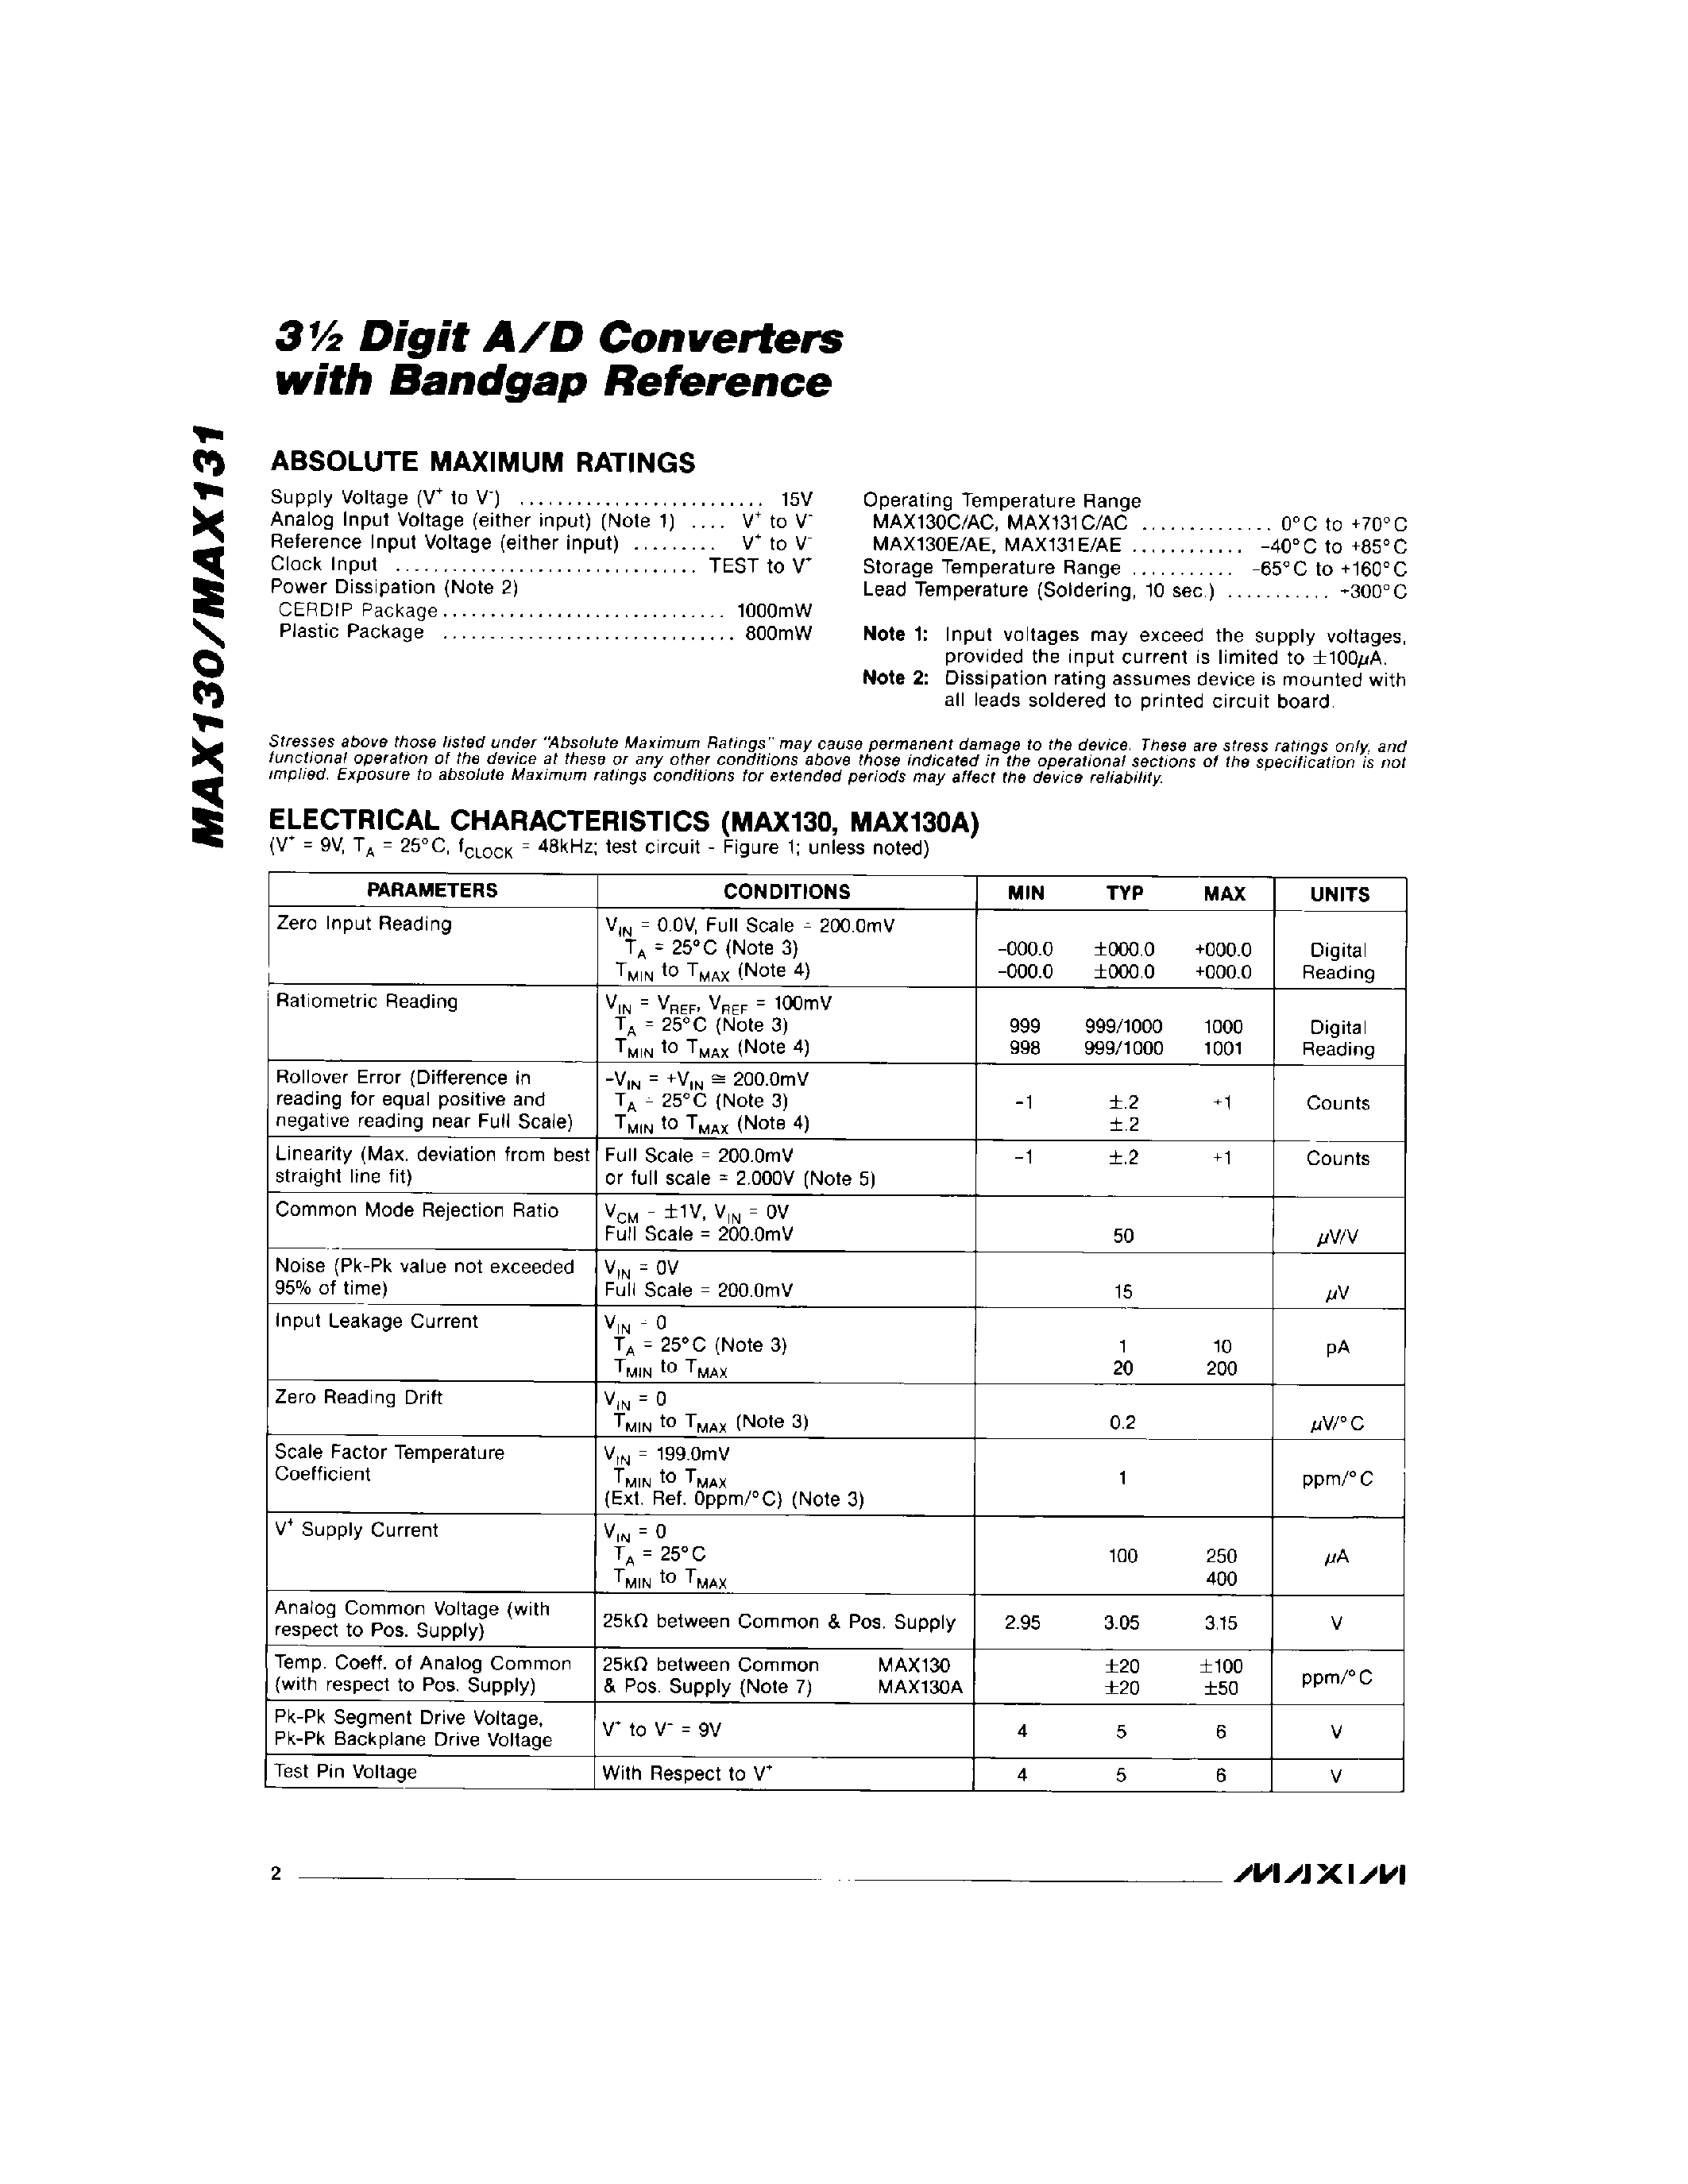 Datasheet MAX131C/D - 3 Digit A/D Converters with Bandgap Refrence page 2